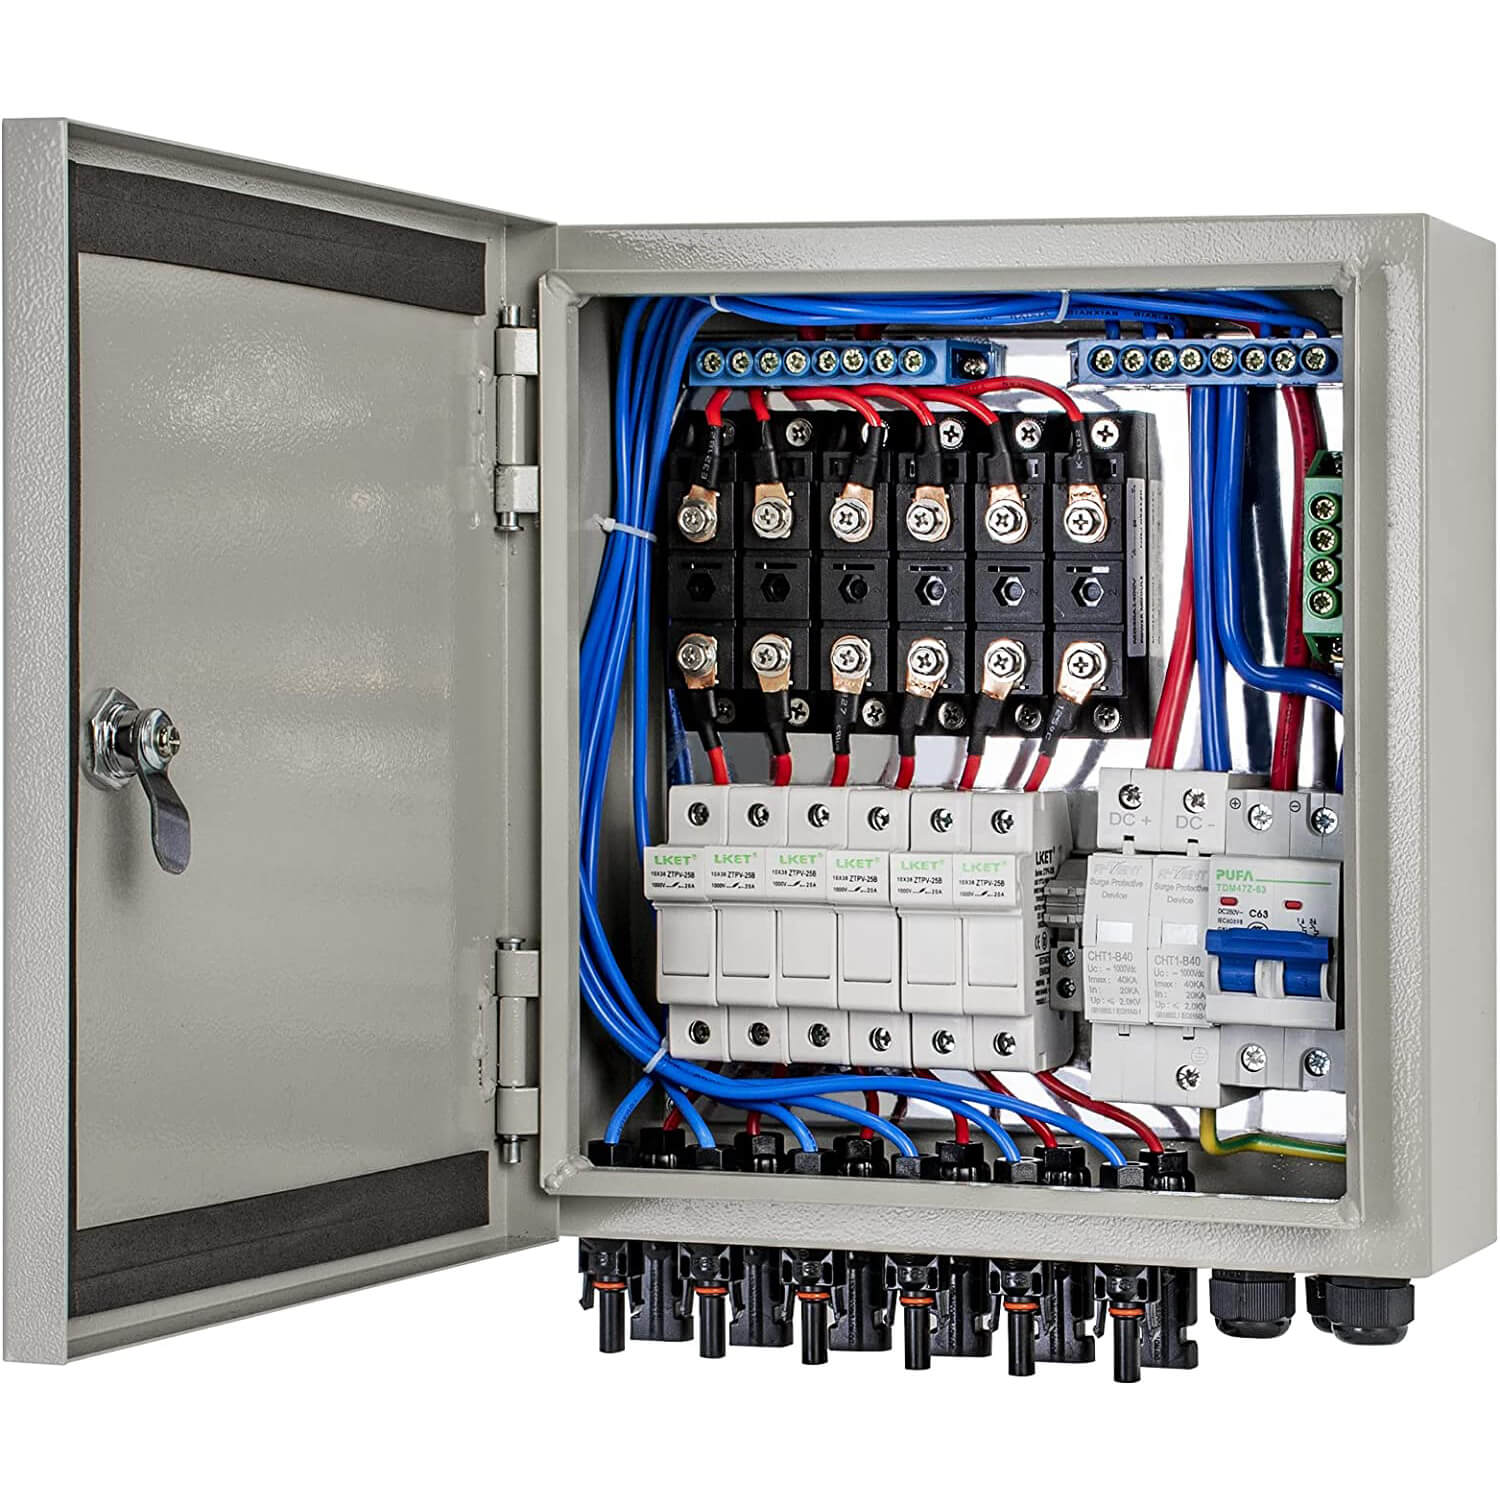 Eco-Worthy String PV combiner box & 63A Circuit Breakers for Solar Panels